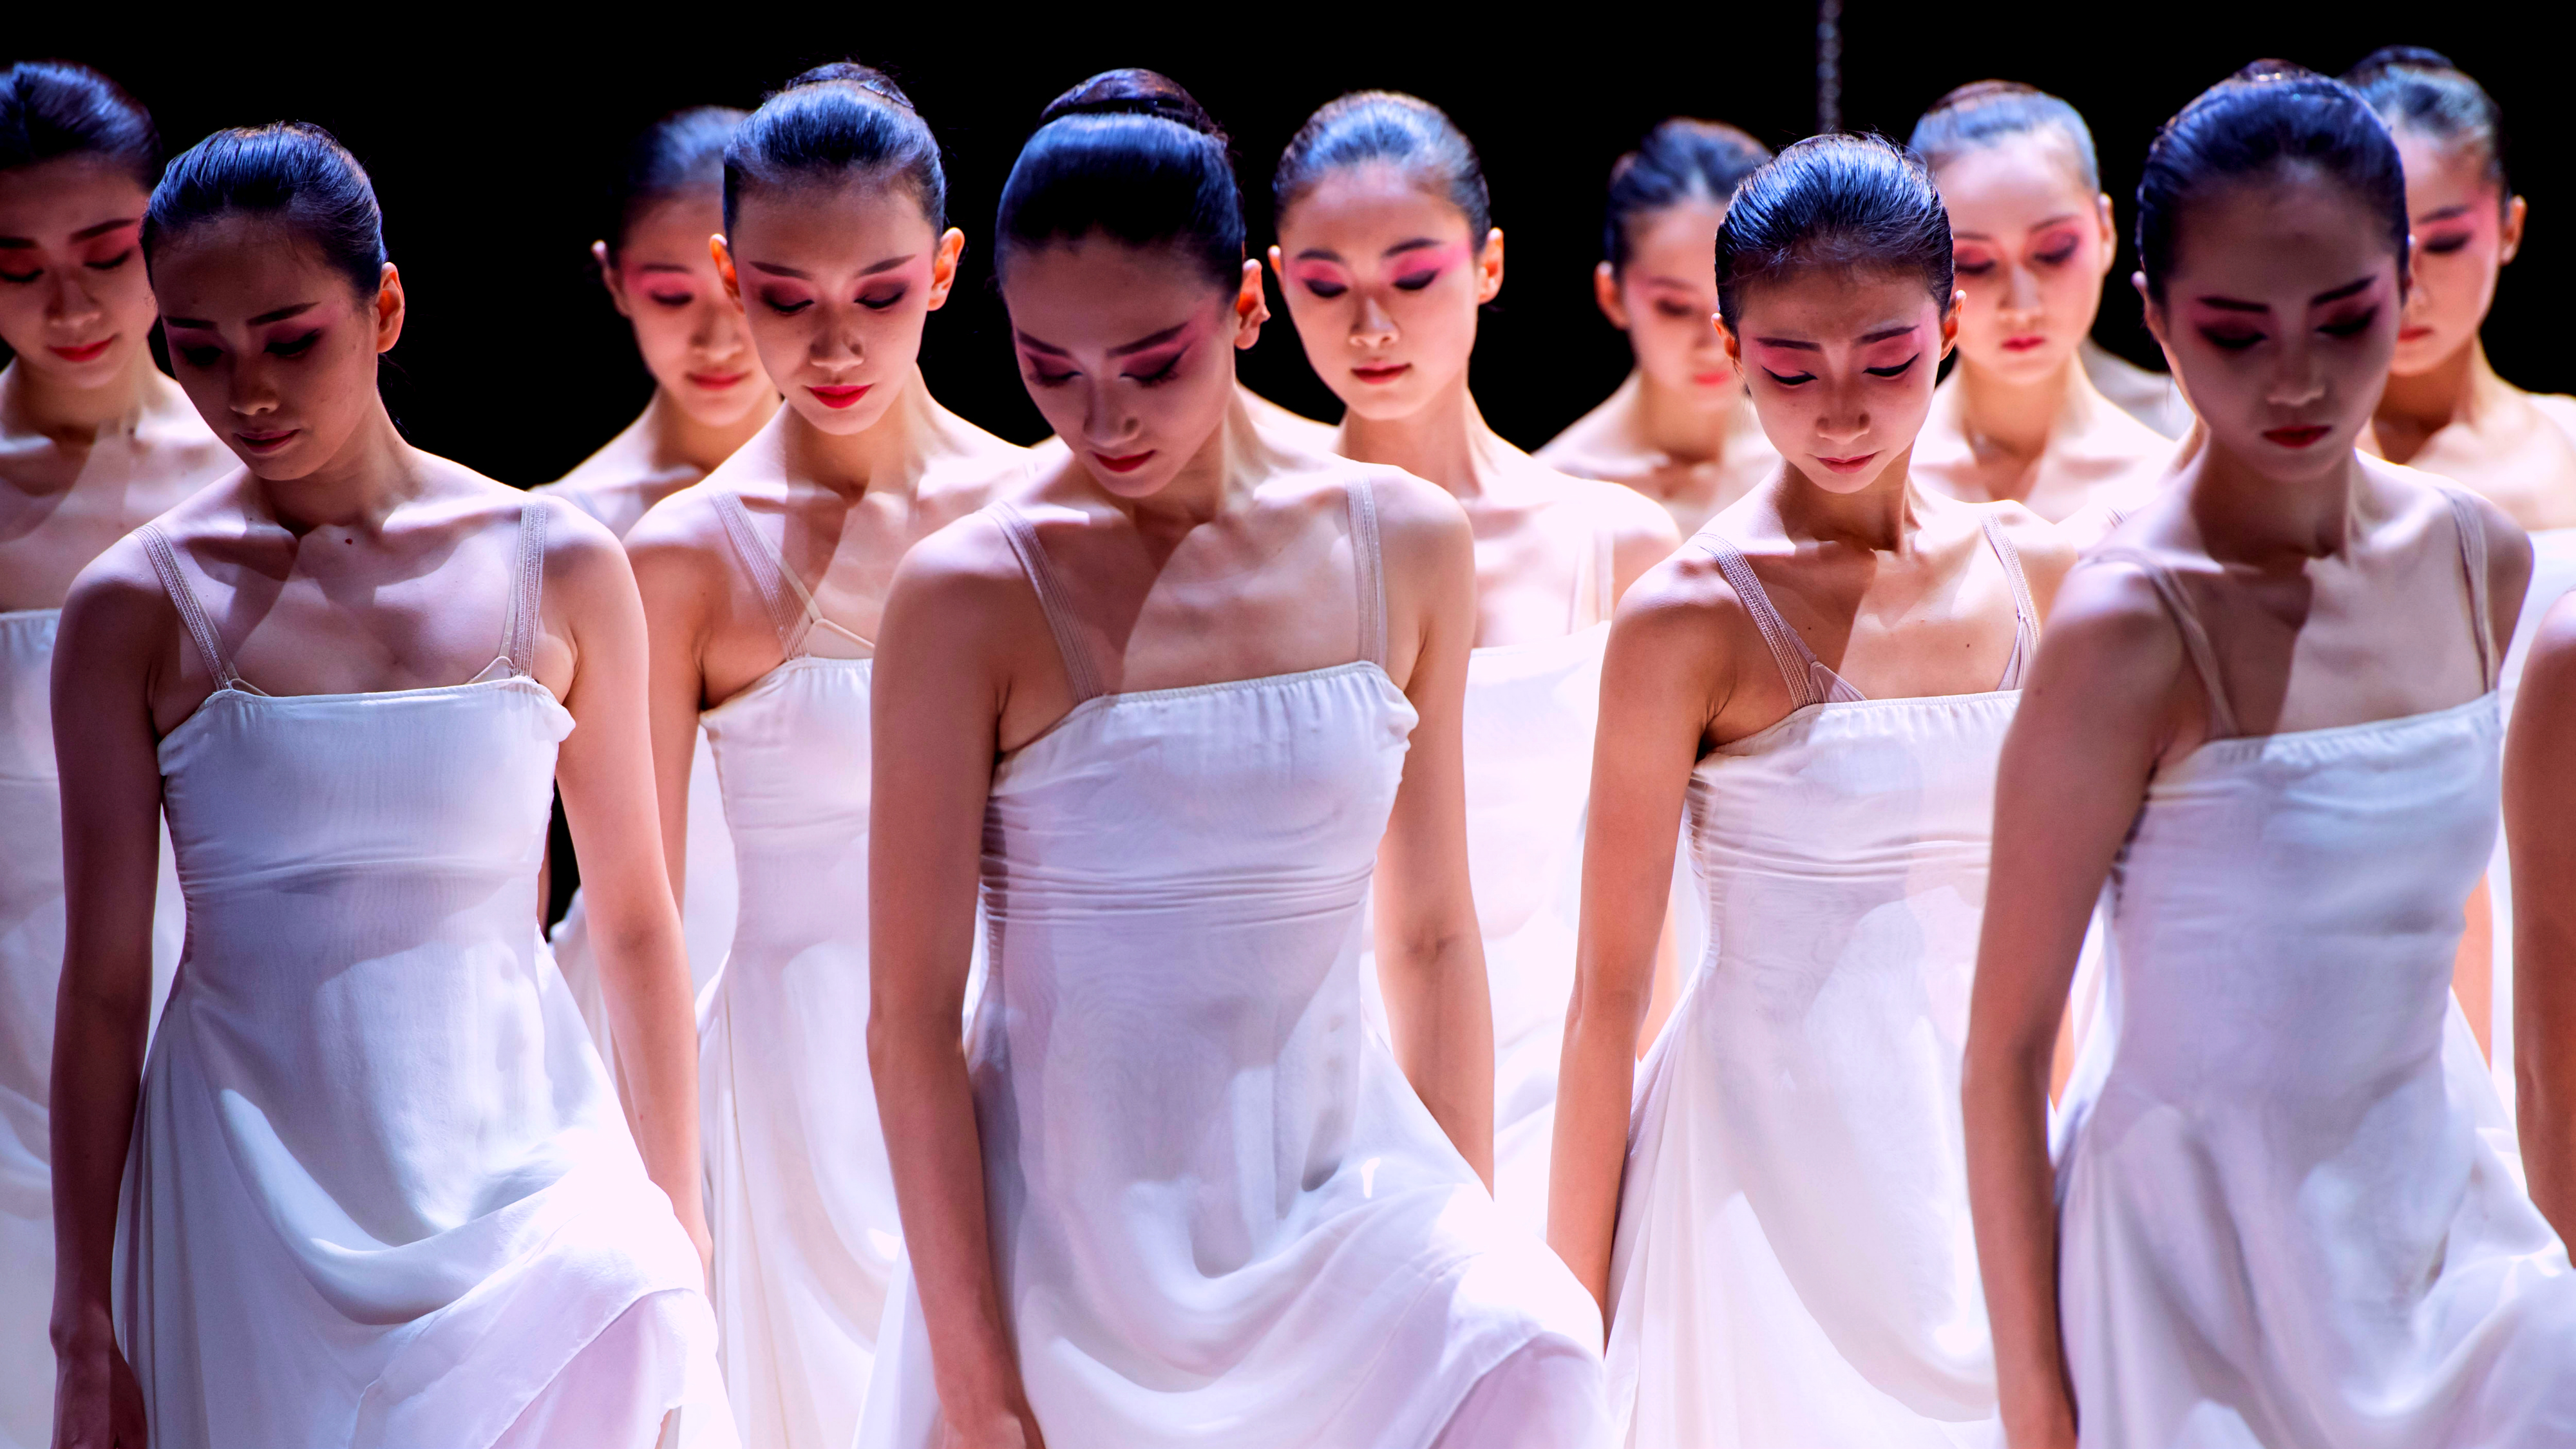 Dancers of the National Ballet of China during a dress rehearsal of The Peony Pavilion at Sadlers Wells Theatre, London